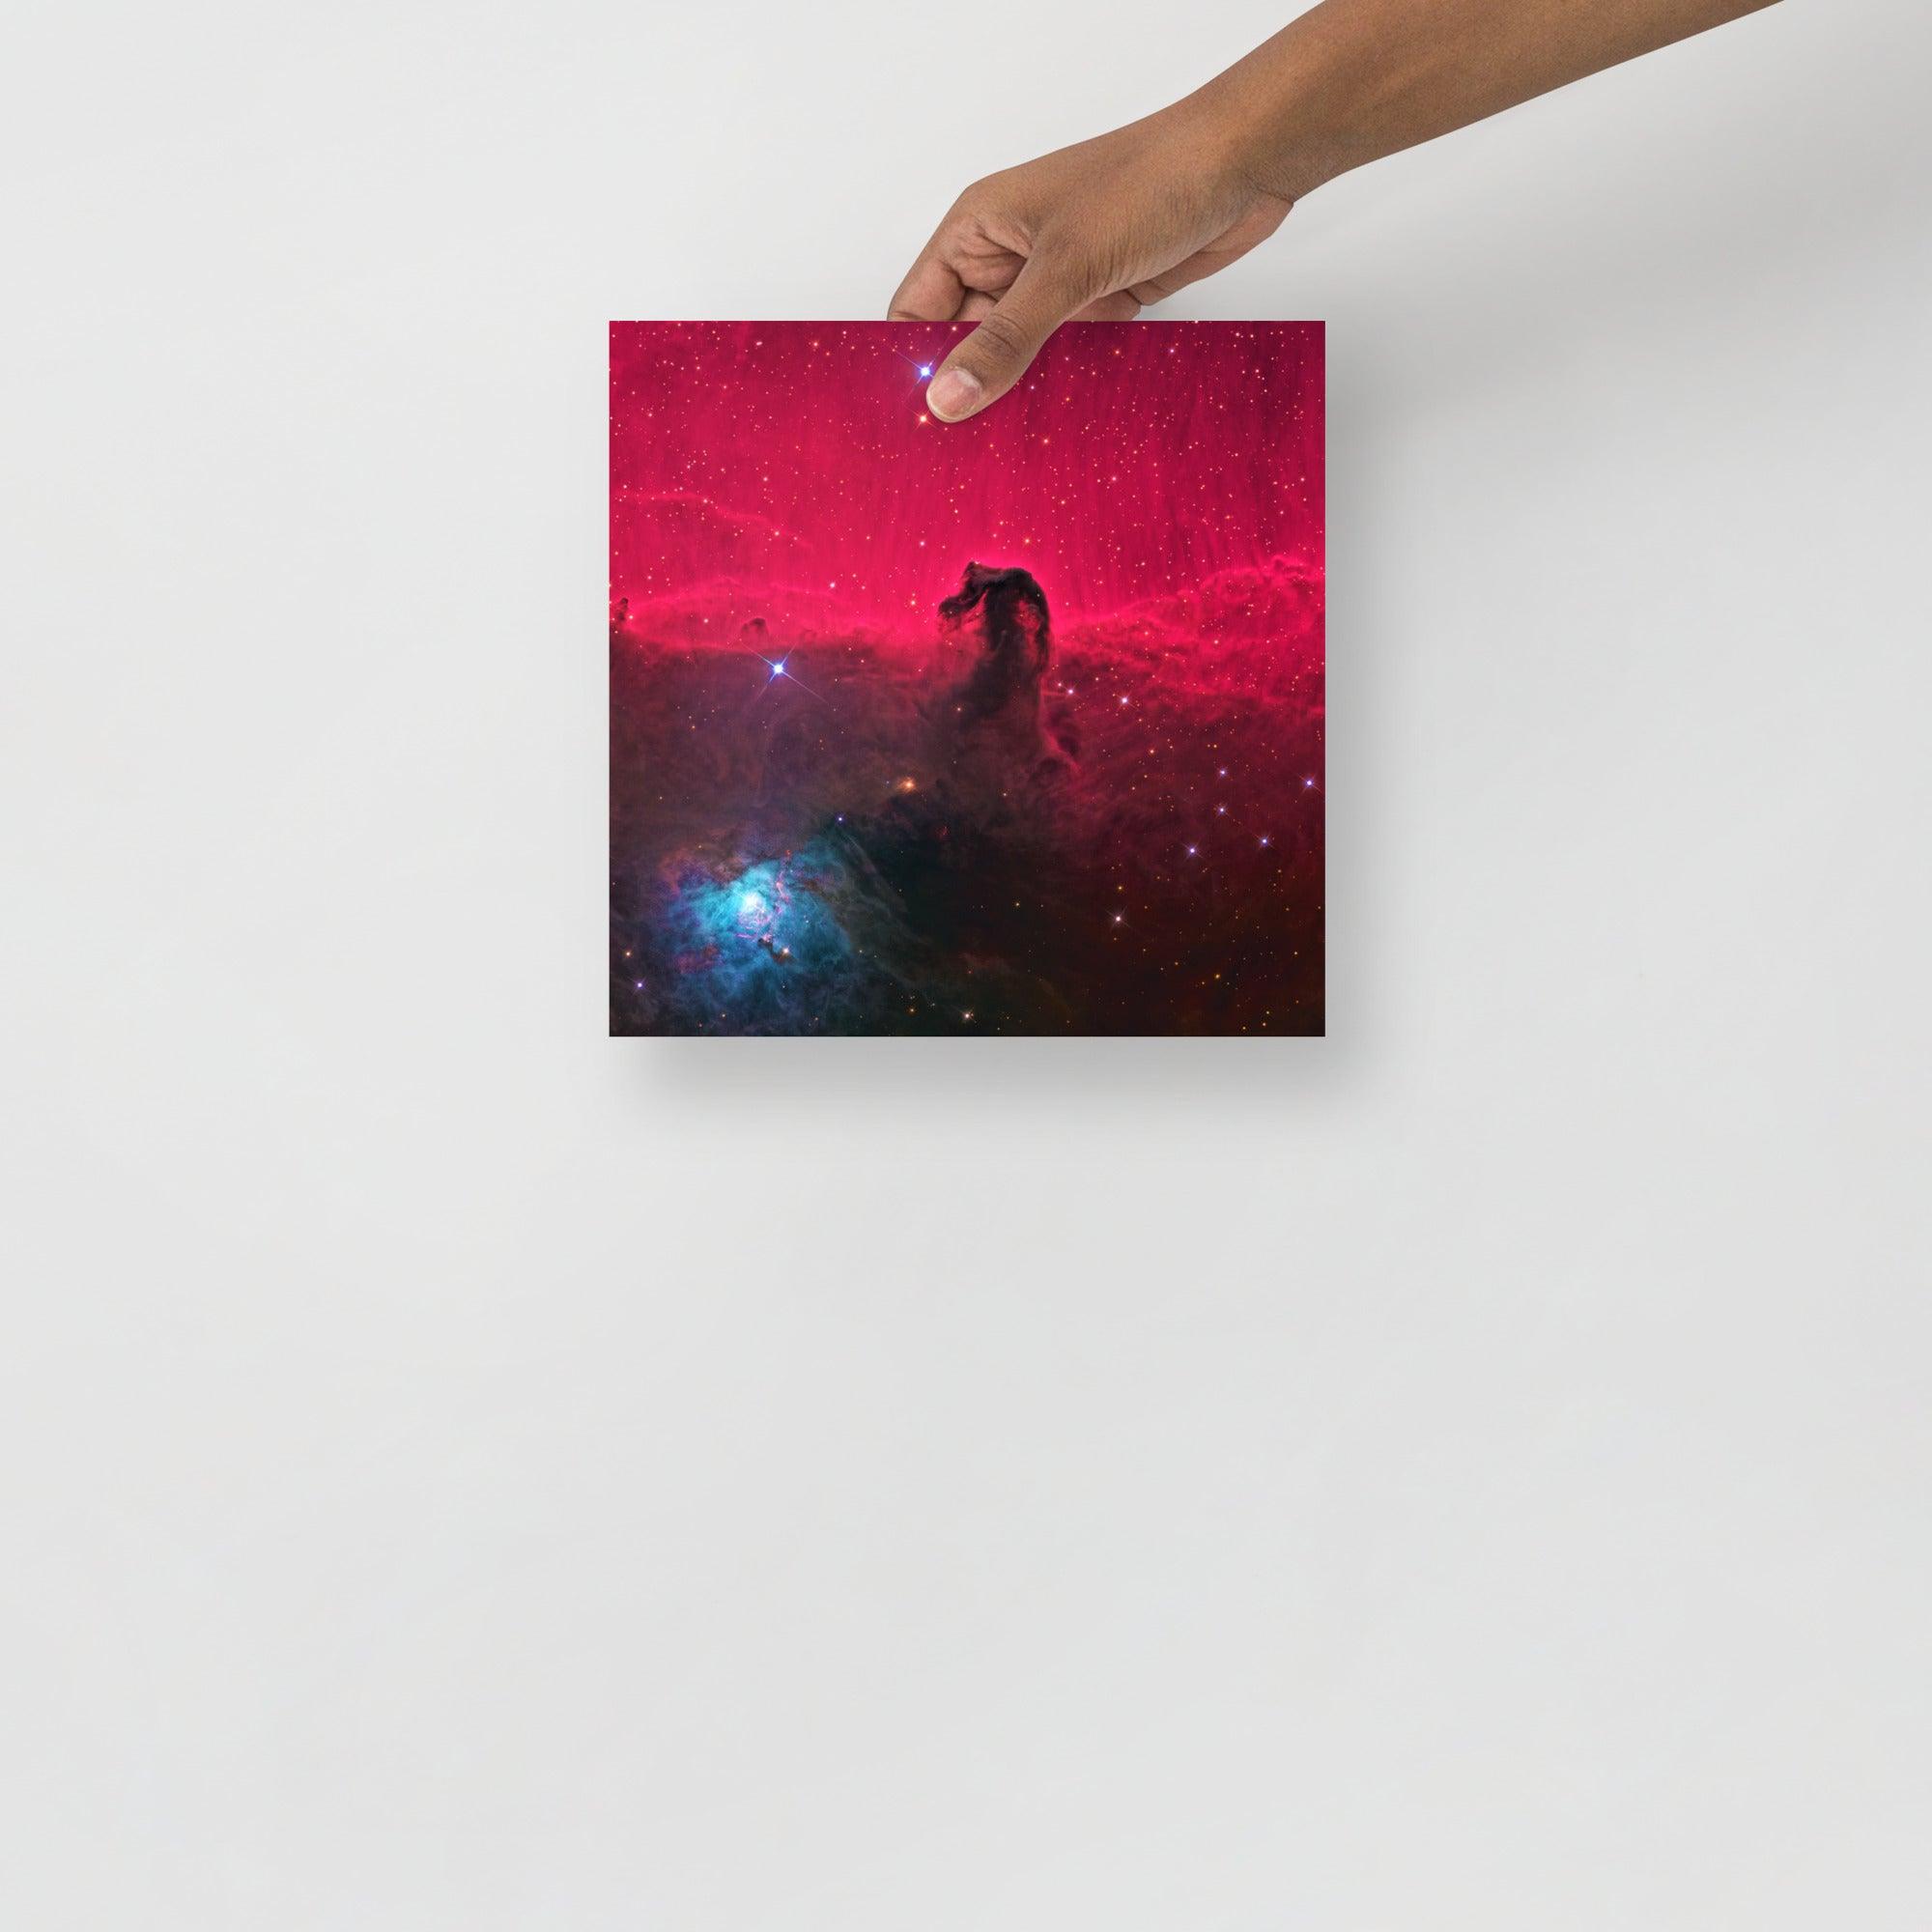 A Horsehead Nebula poster on a plain backdrop in size 10x10”.